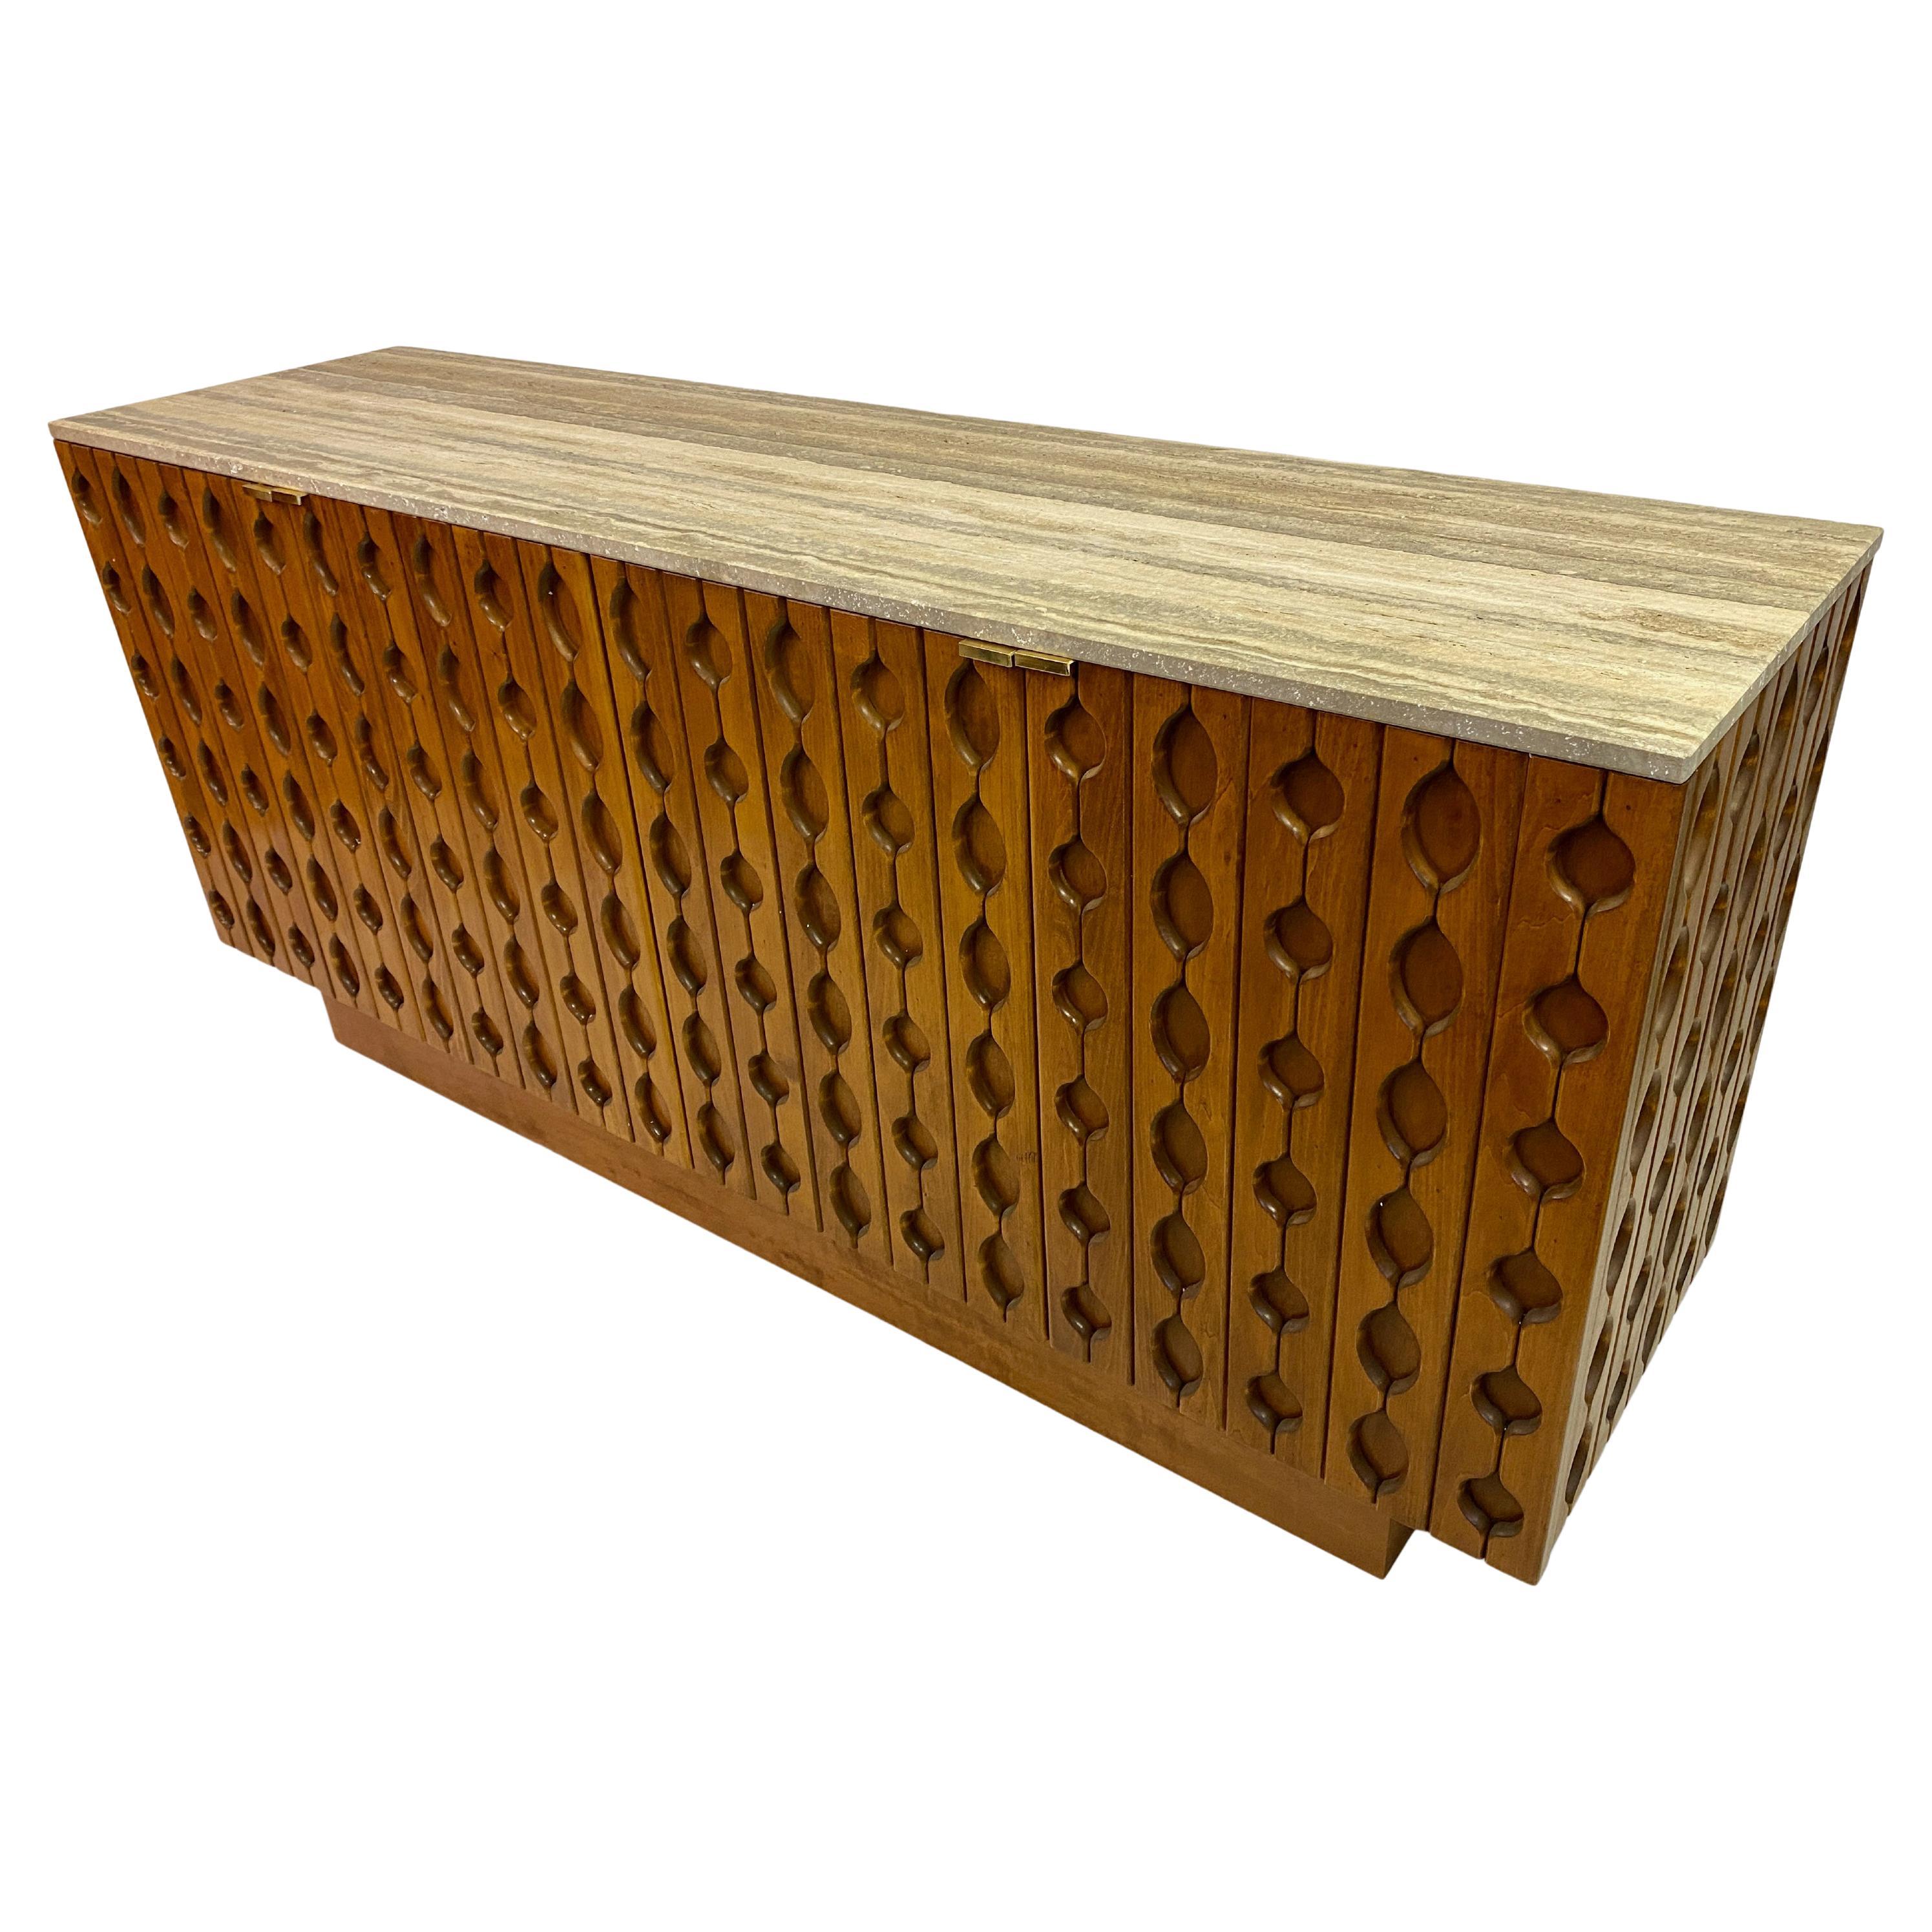 Contemporary Italian Brutalist Wood And Travertine Sideboard For Sale